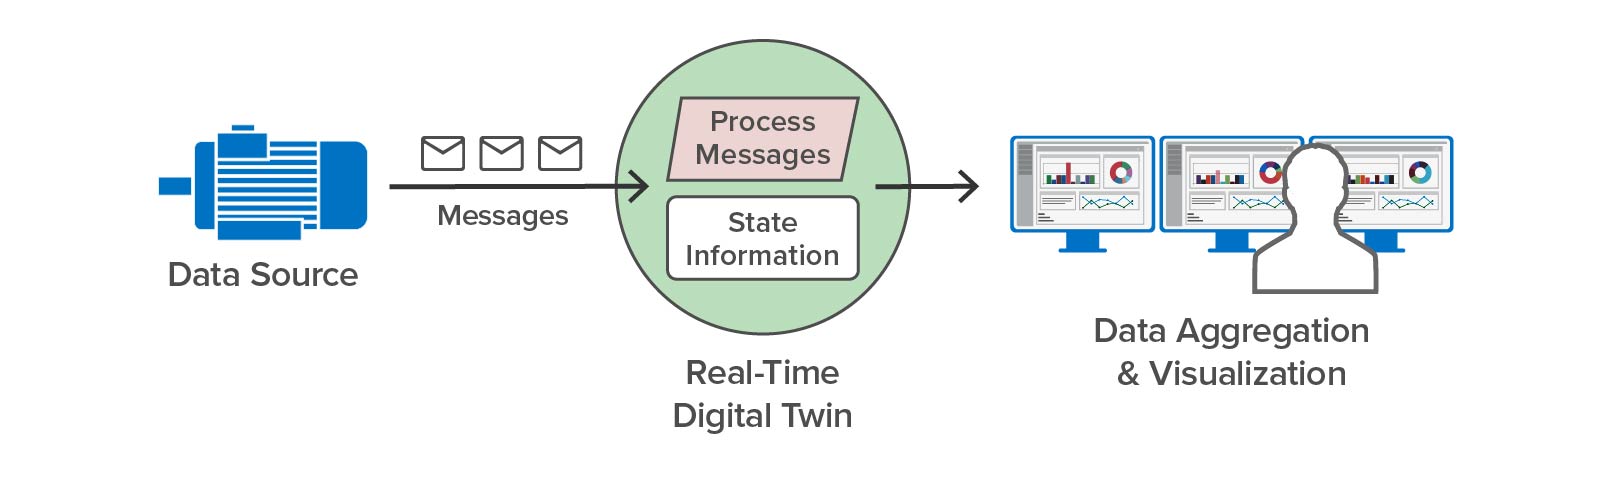 Image of a data source sending messages to a real-time digital twin that analyzes the messages and enables data aggregation and visualization.